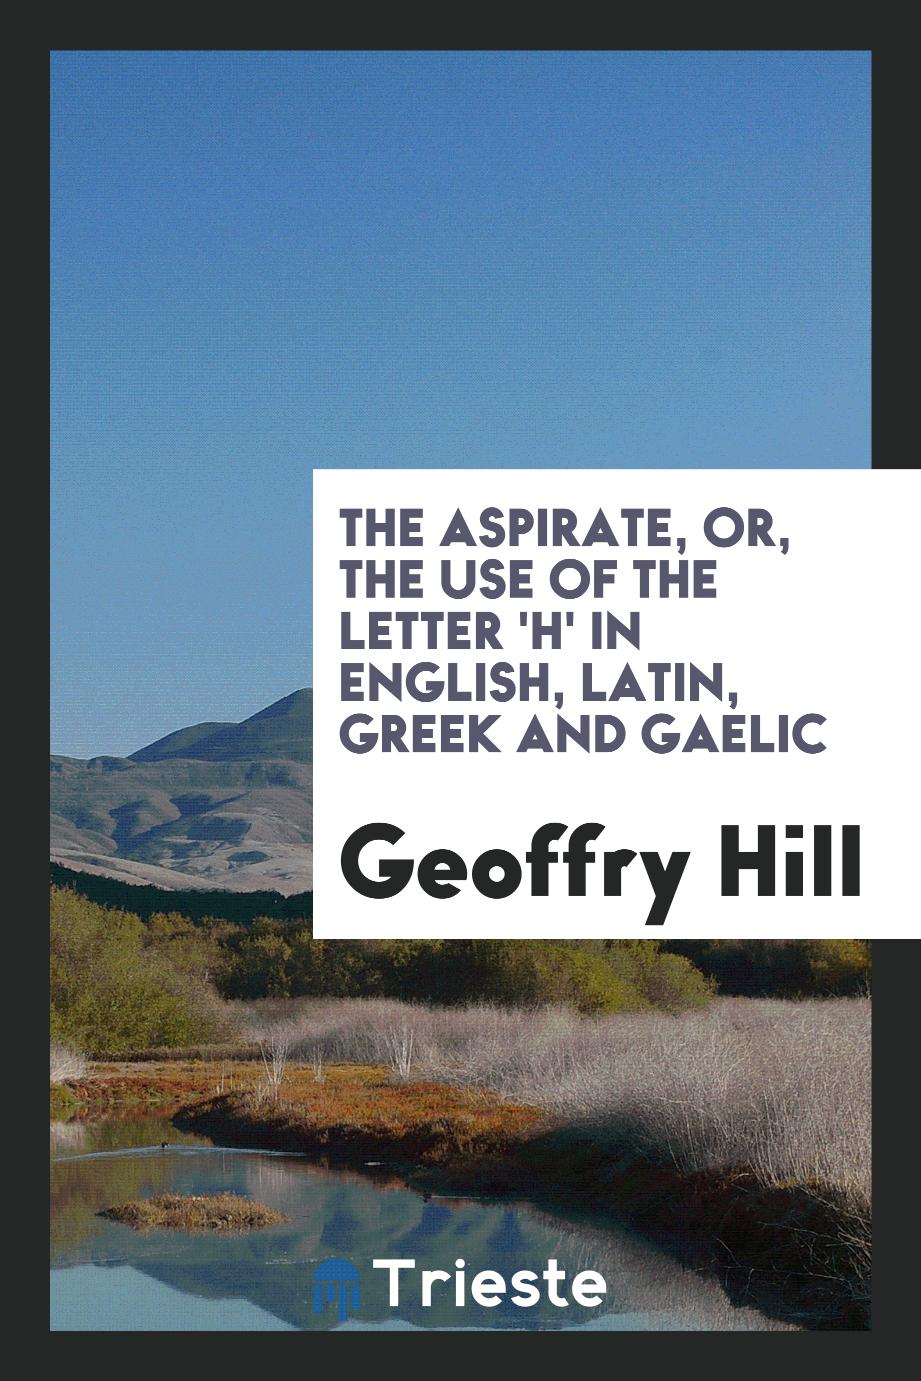 The Aspirate, or, the Use of the Letter 'H' in English, Latin, Greek and Gaelic